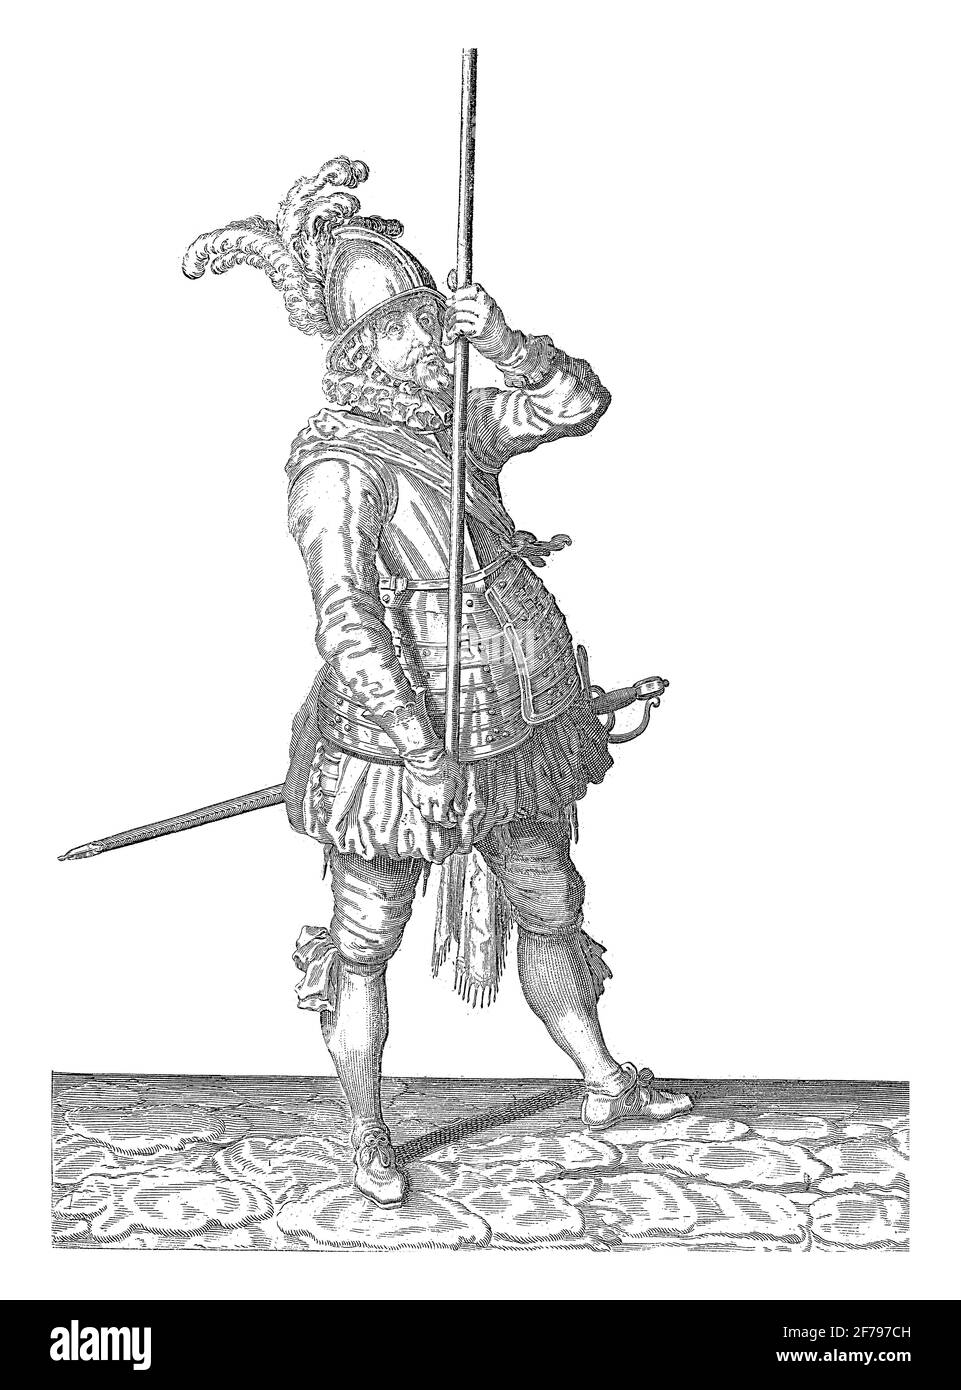 A Soldier, Full Length out, to the right, holding a skewer (lance) with both hands upright high above the ground, vintage engraving. Stock Photo